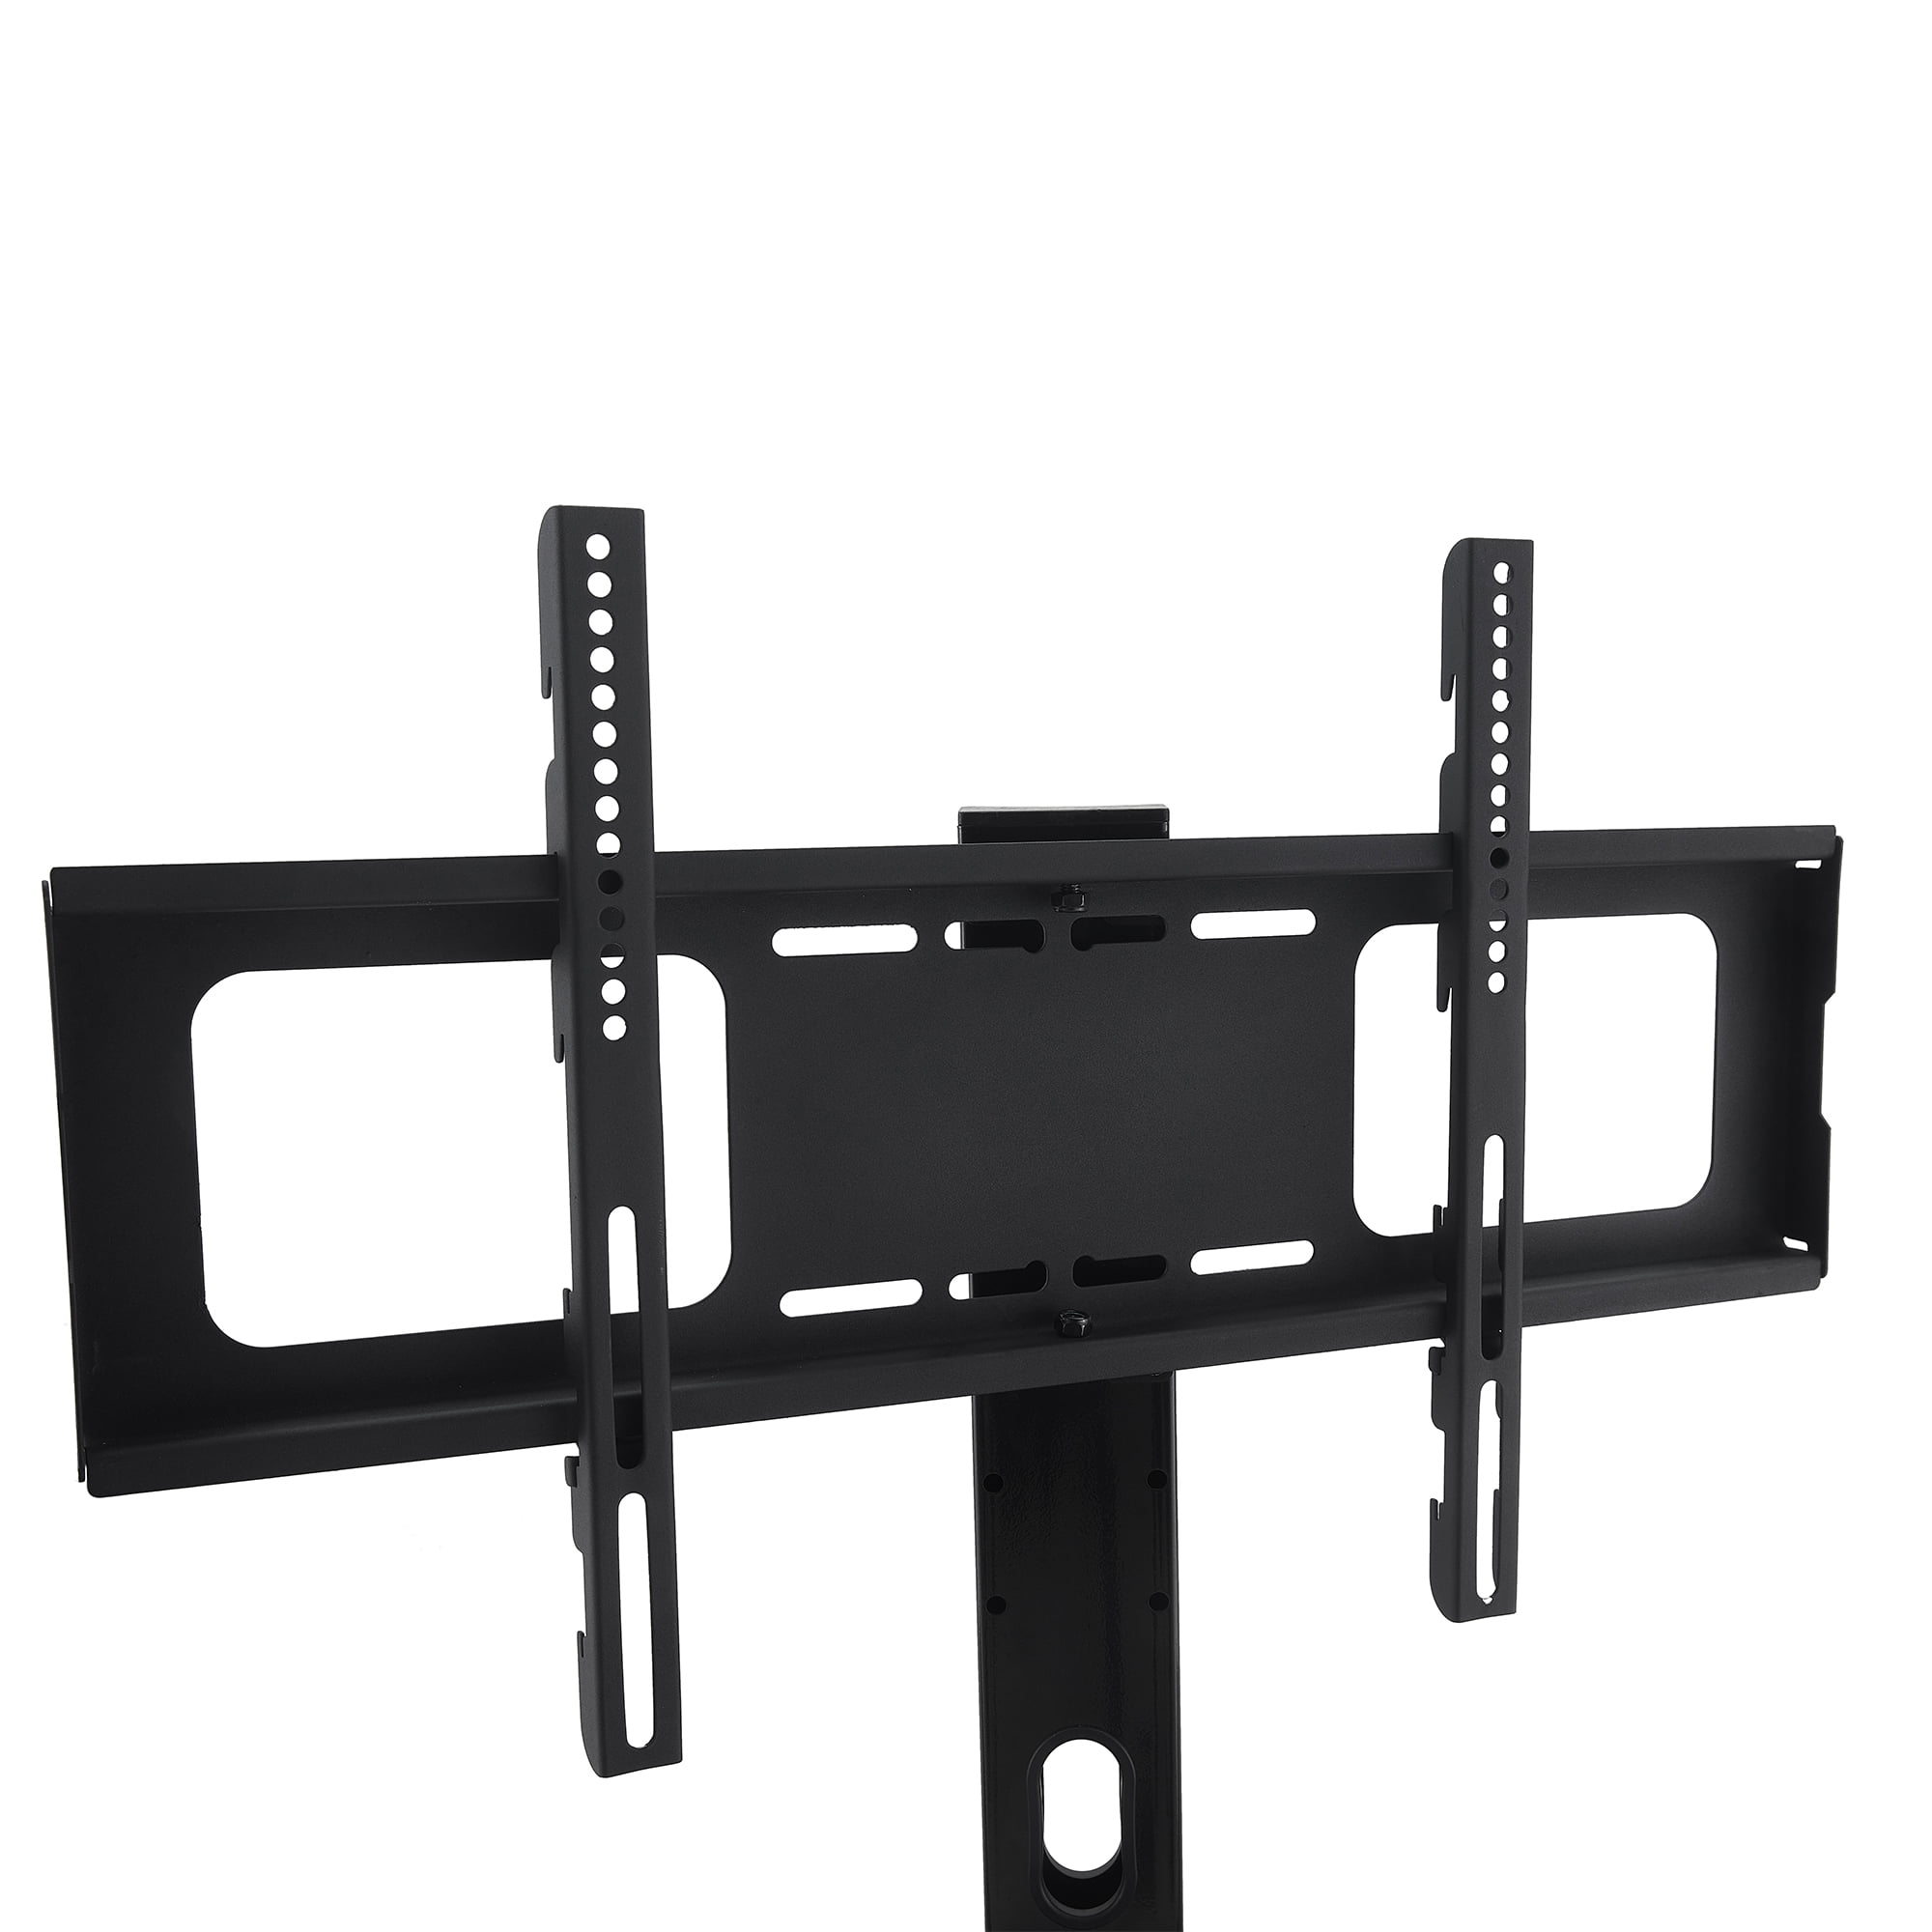 Details about   Adjustable Mobile TV Stand Mount Universal Flat Screen Rolling TV Cart 32-65” 